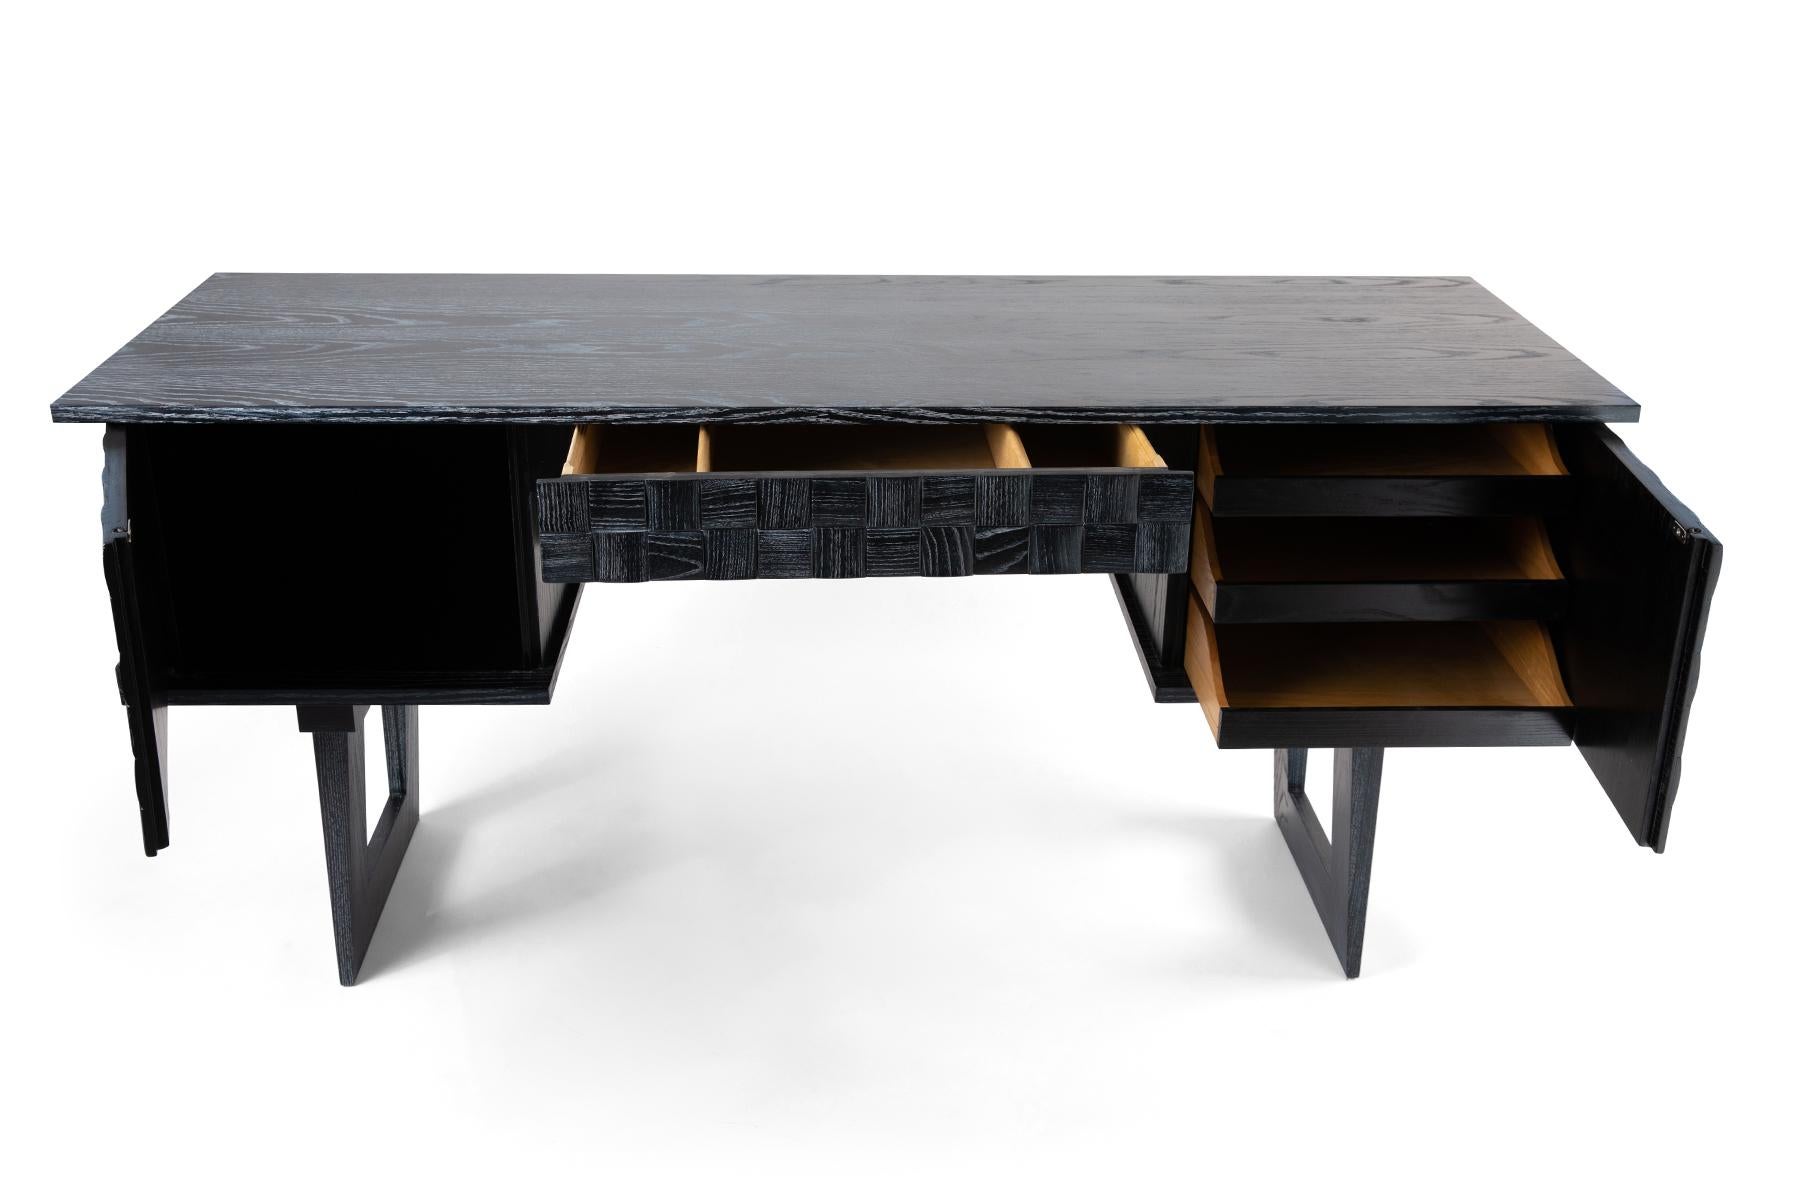 Paul Laszlo for brown saltman cerused oak desk circa Mid-1950s. Newly finished.